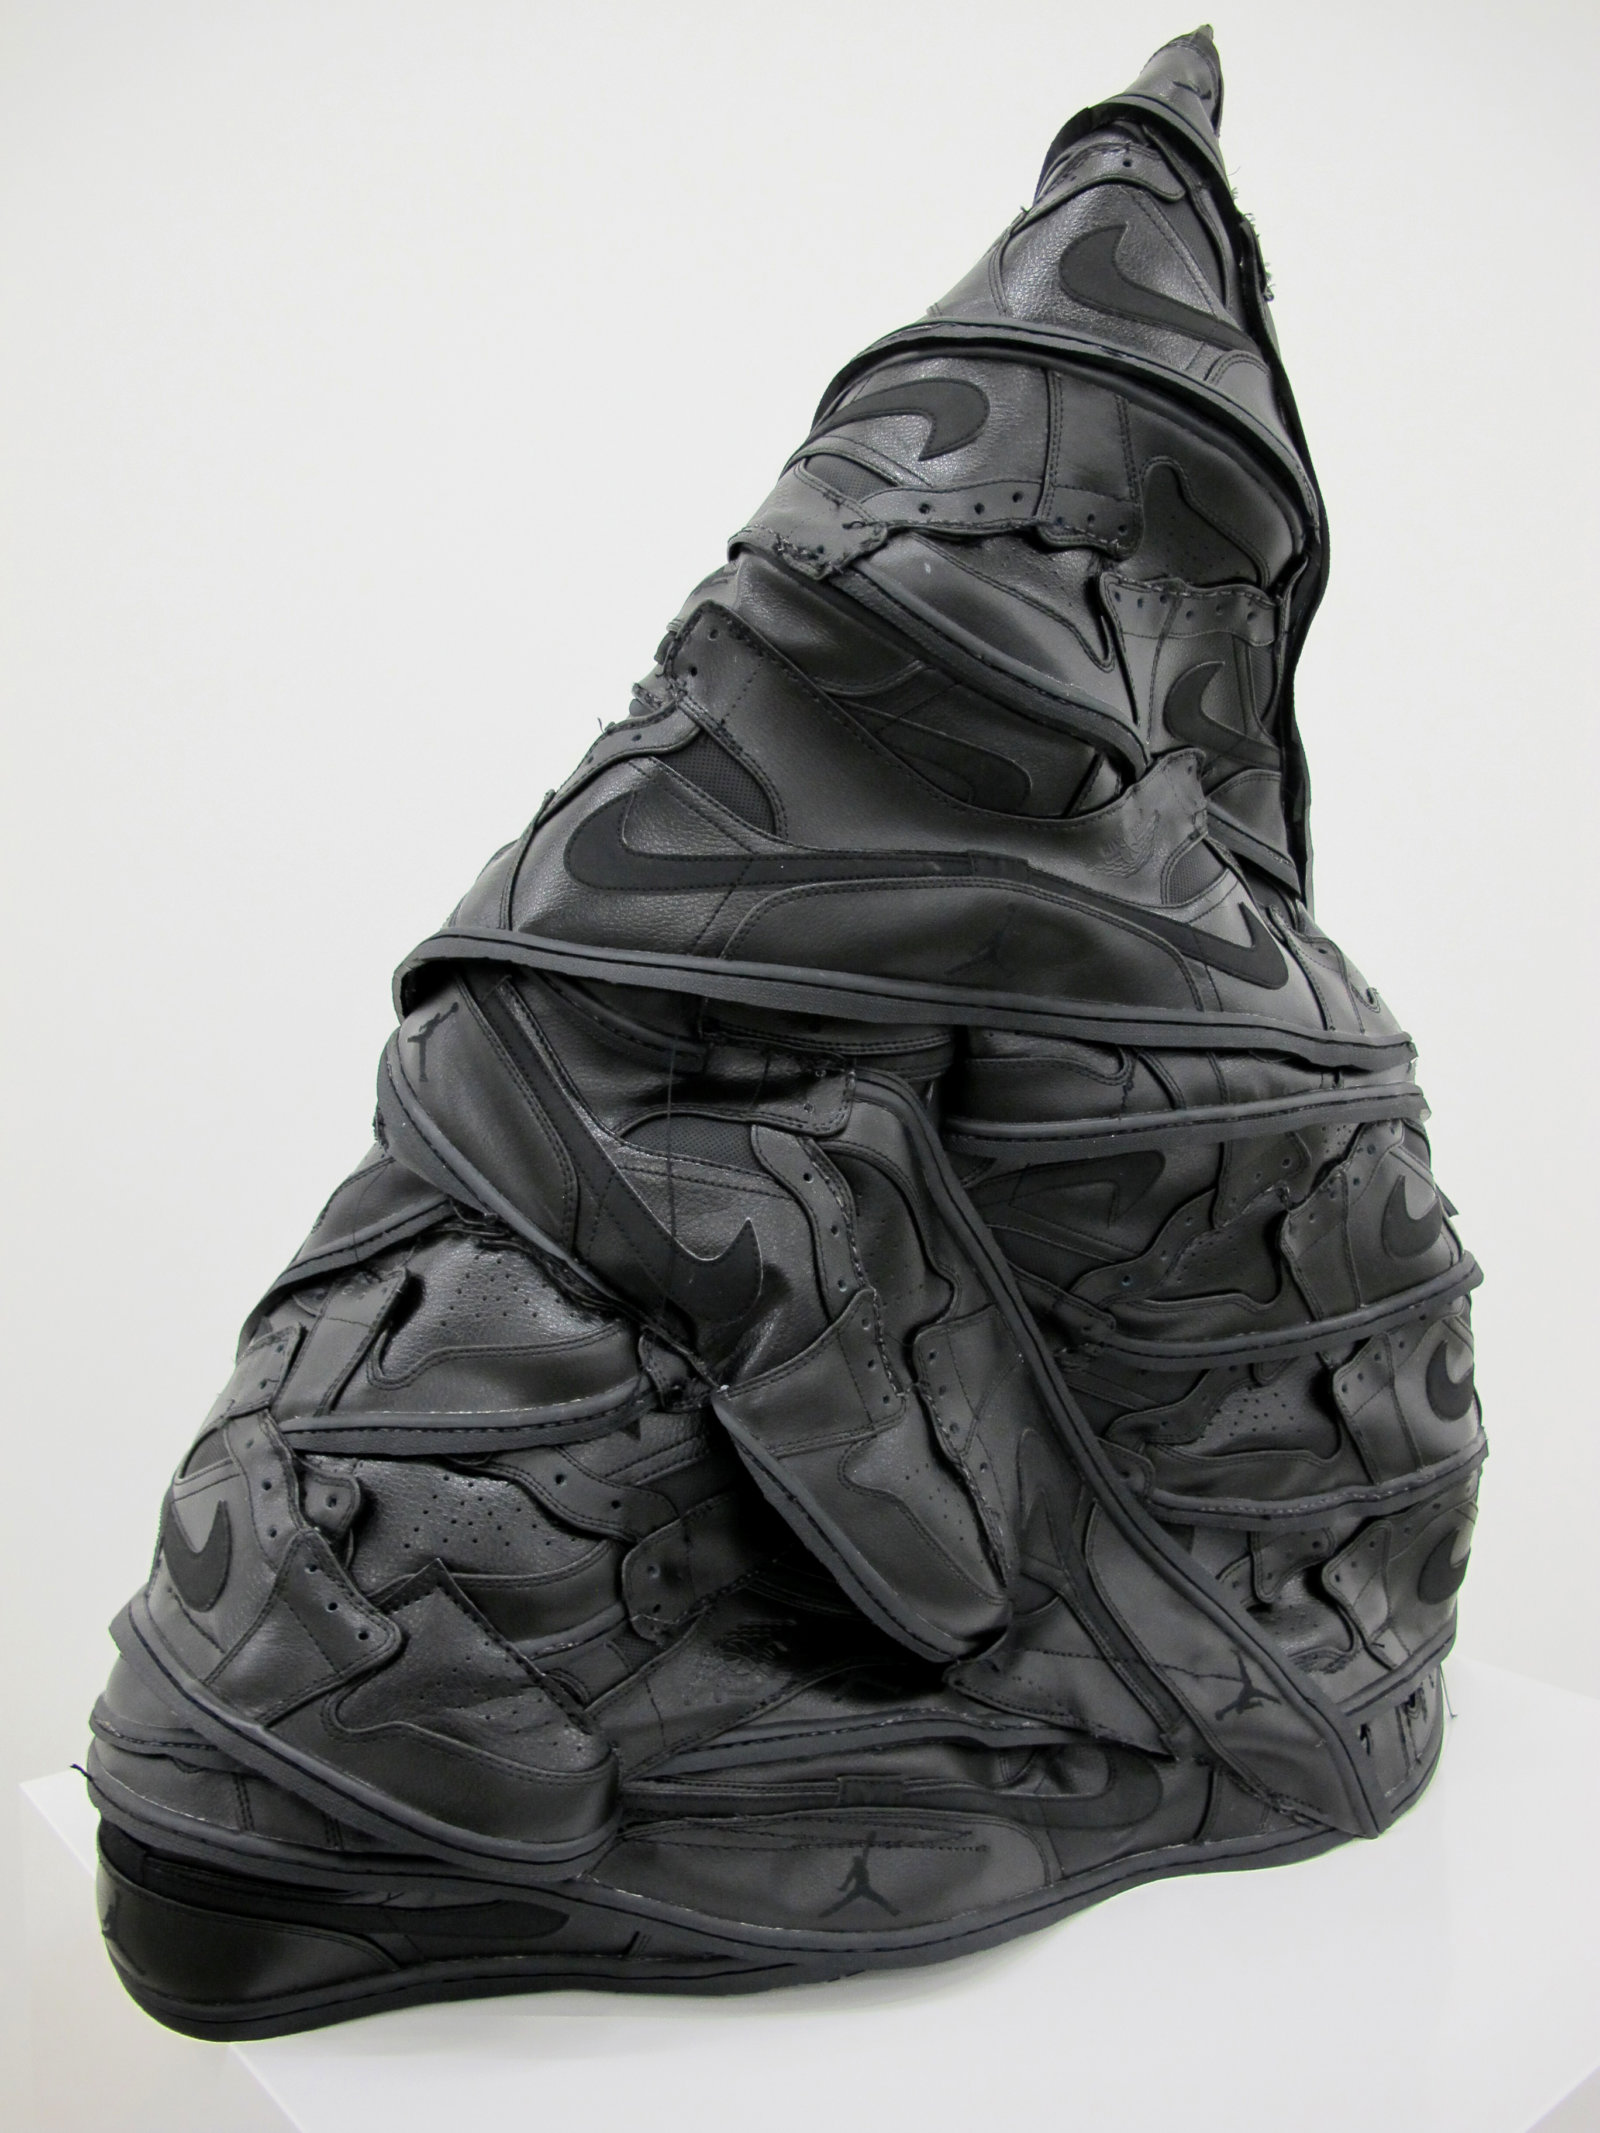 Brian Jungen, I Shall Be Released, 2015, nike air jordan shoes (black, #1), 29 x 26 x 12 in. (74 x 66 x 31 cm)